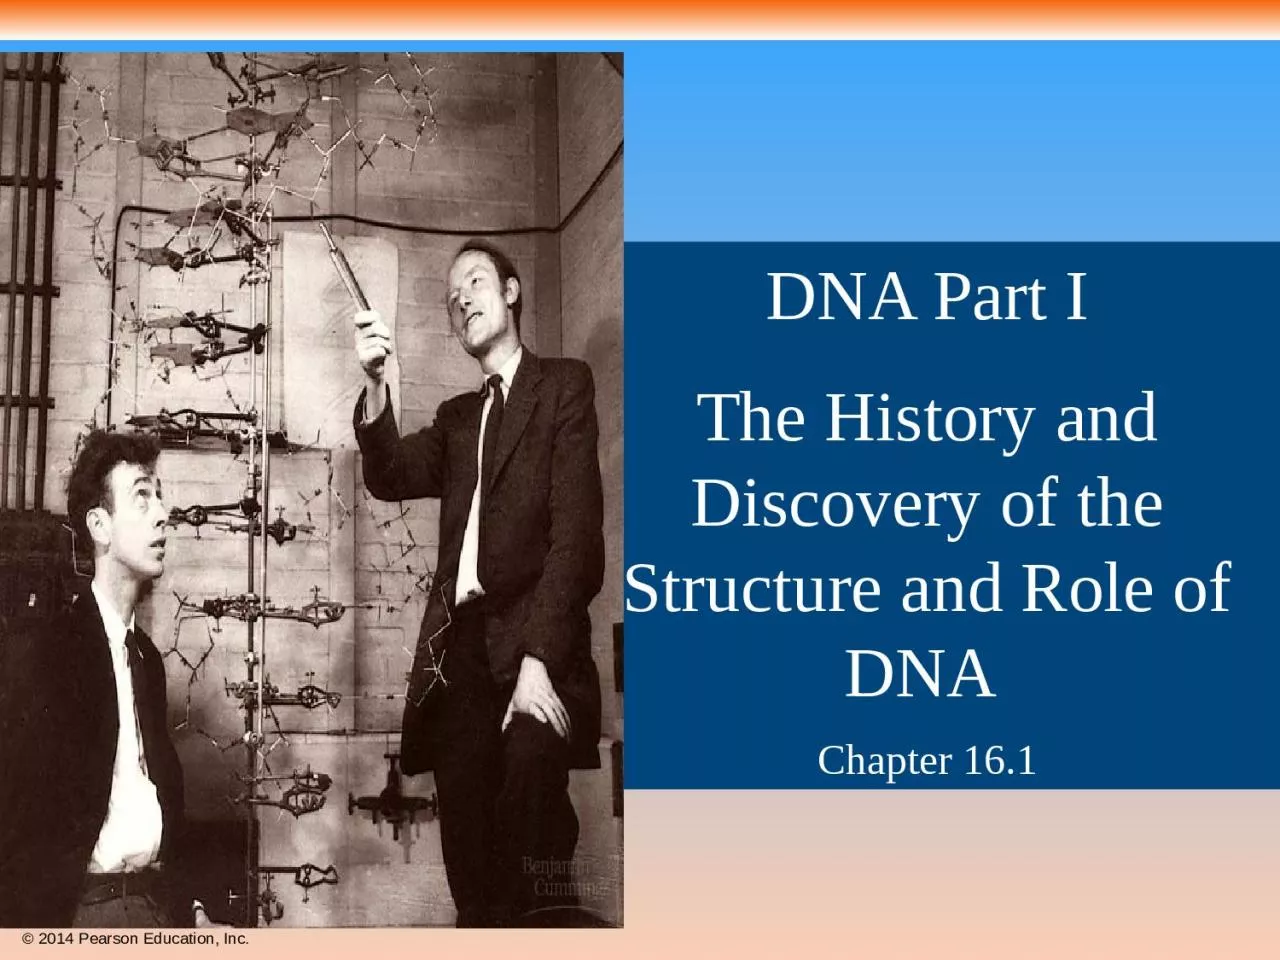 DNA Part I The History and Discovery of the Structure and Role of DNA